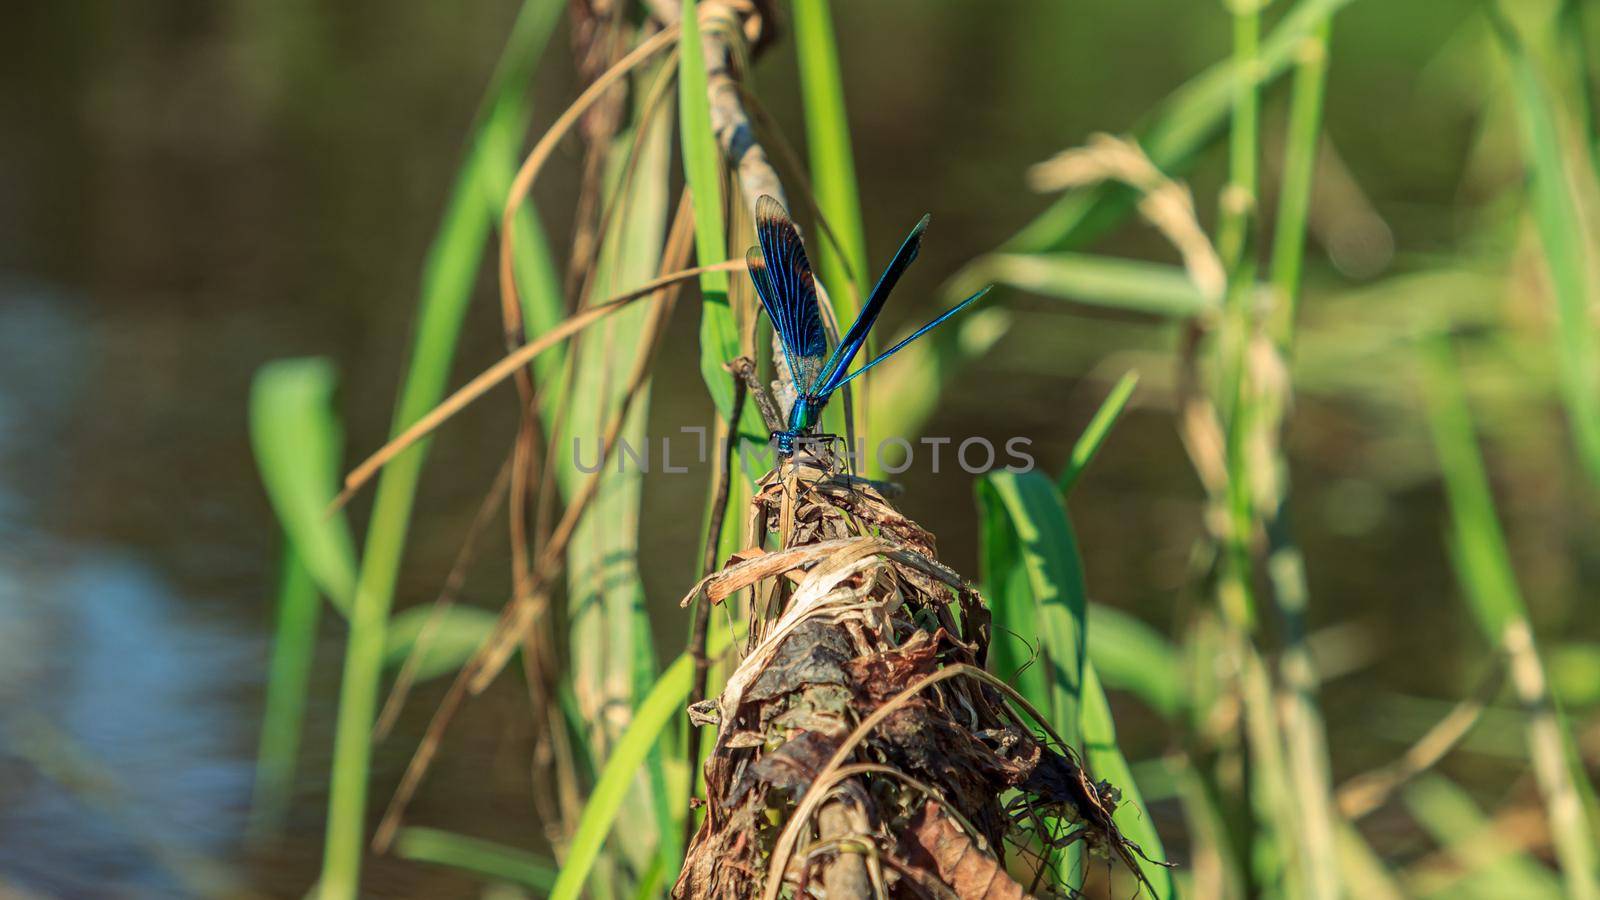 Blue dragonfly sitting on green river water grass with open wings